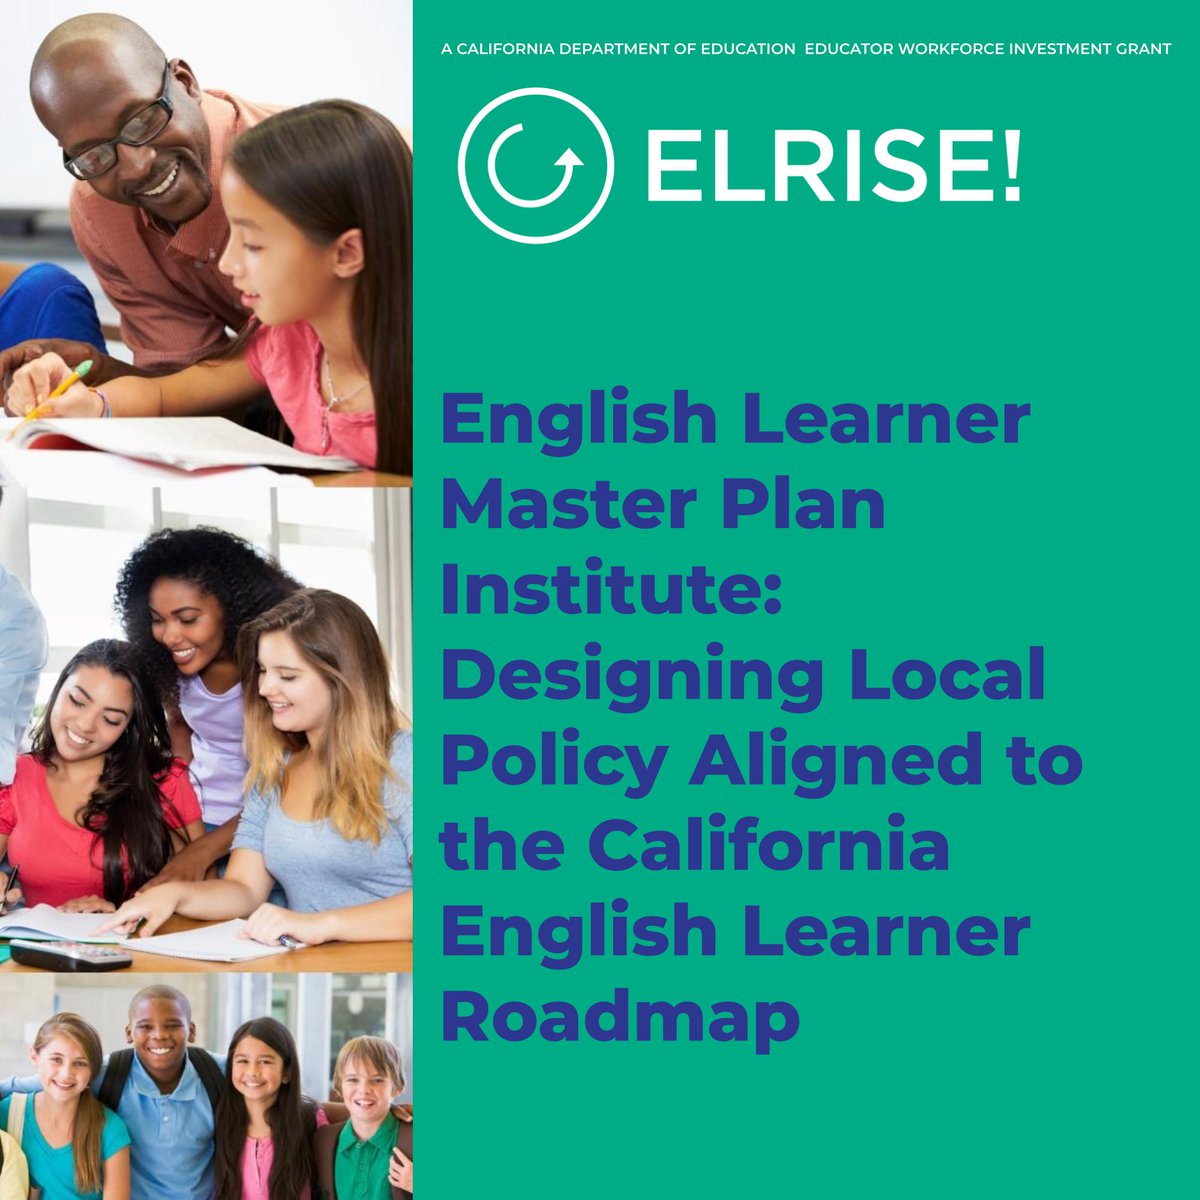 Across the state, administrators are working to align district #EnglishLearner policies to the CA English Learner Roadmap. Sound like you? Whether you’re getting started or revising, this ELRISE! Microsite will help you get to where you need to go. caltog.co/3JTtPiJ